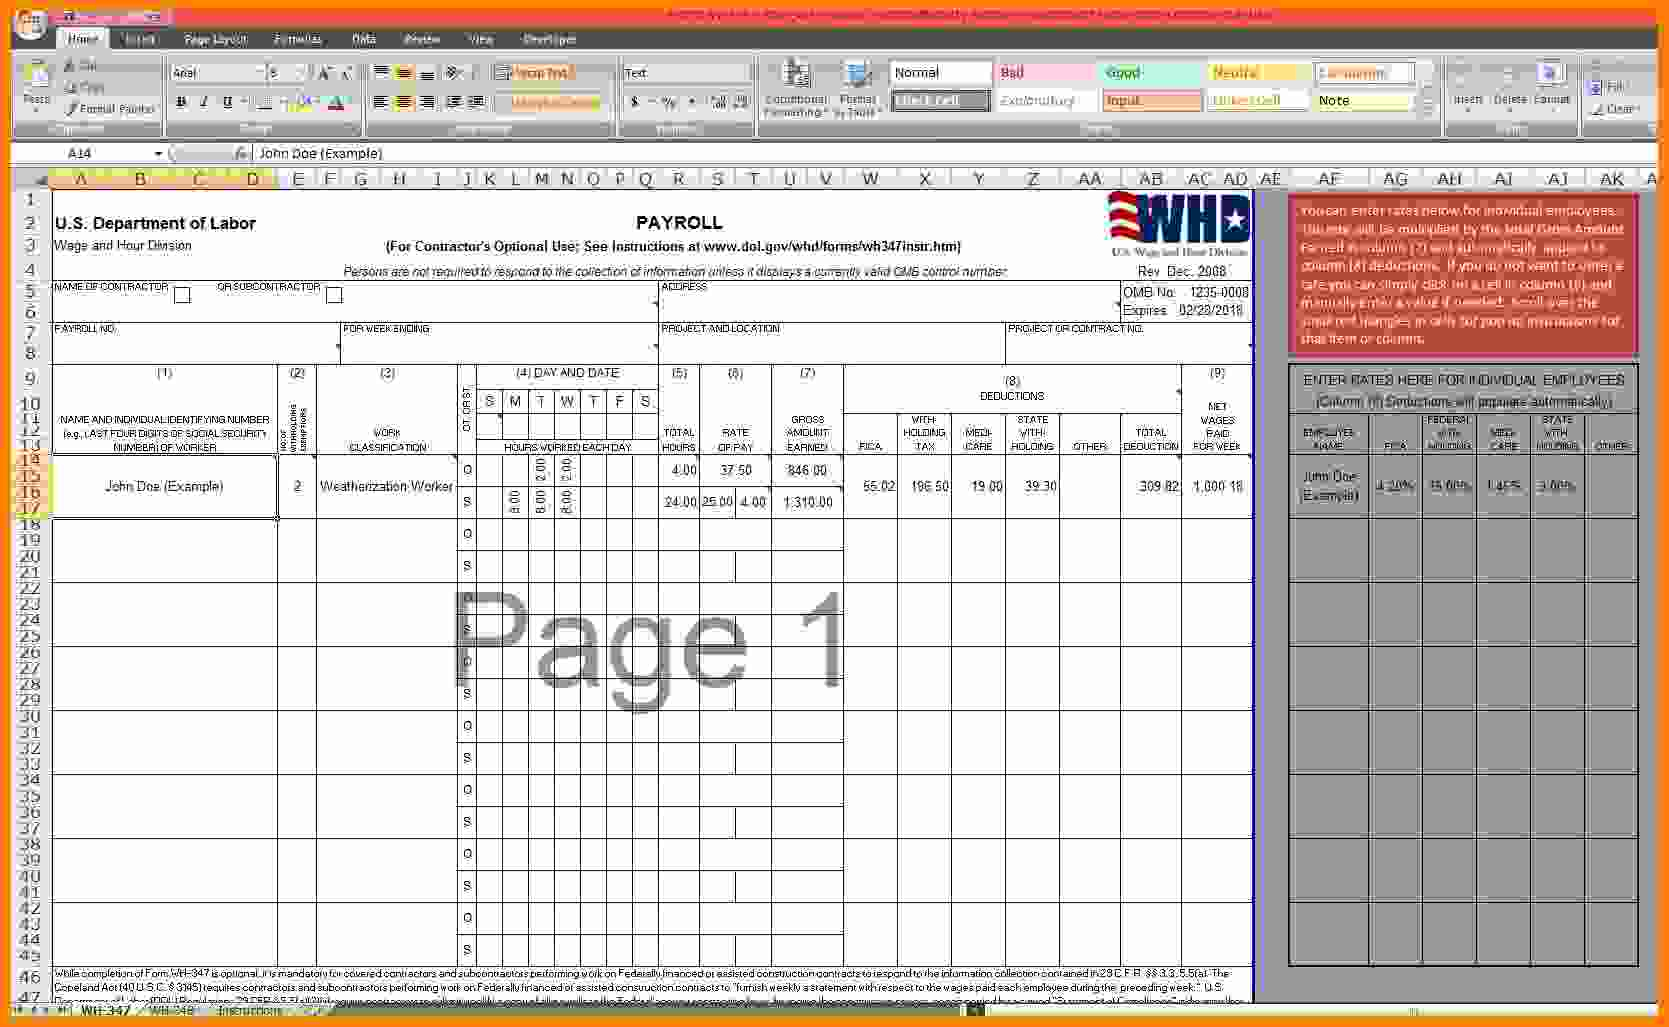 7+ Payroll Excel Template Free | Technician Salary Slip within Payroll Spreadsheet Template Free